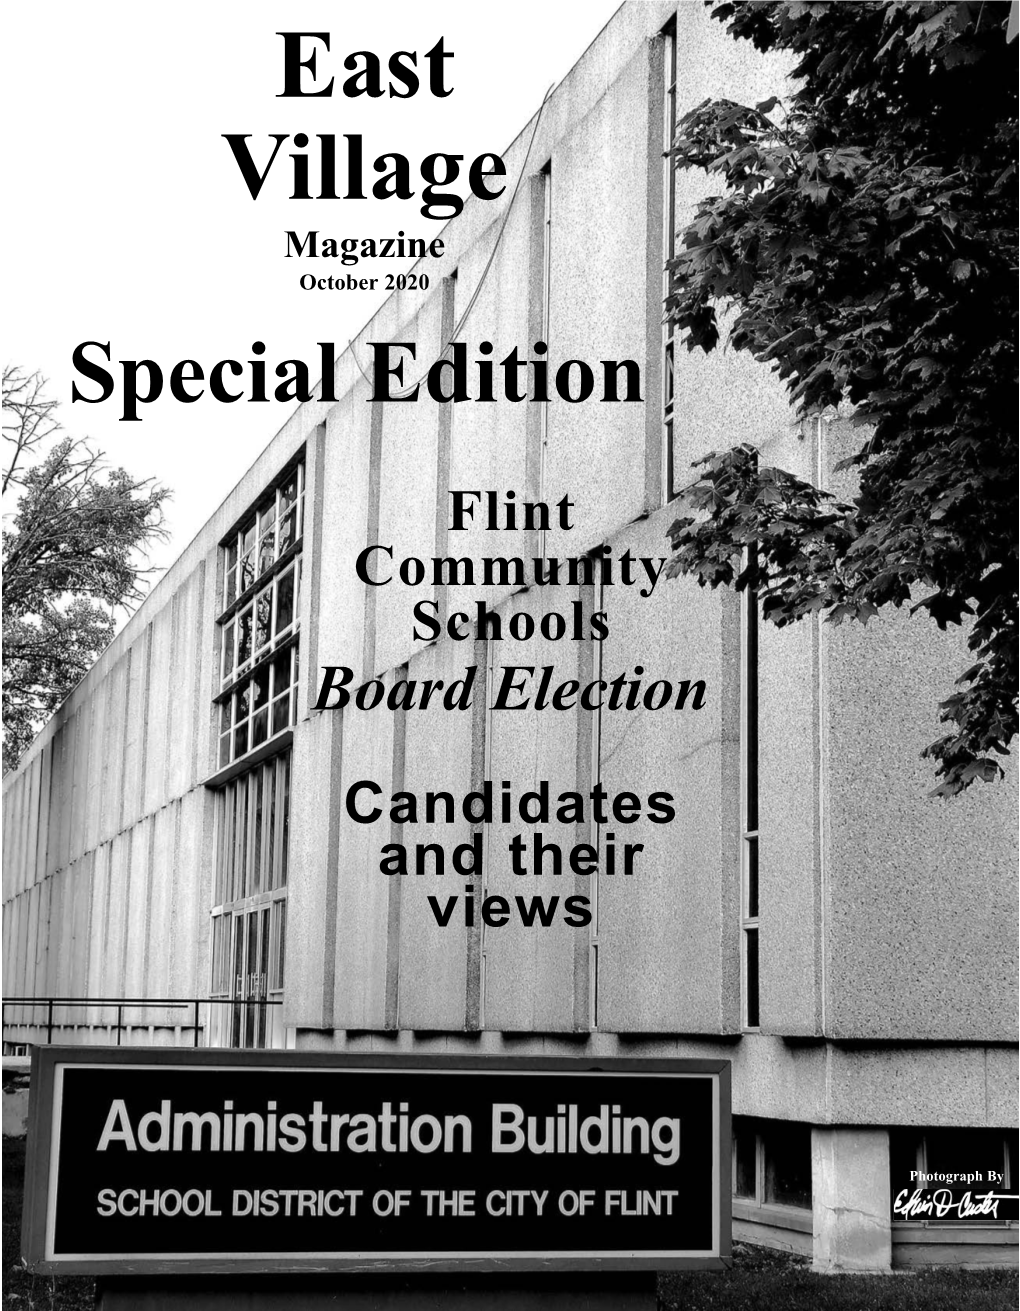 East Village Magazine – October 2020 – Special Edition